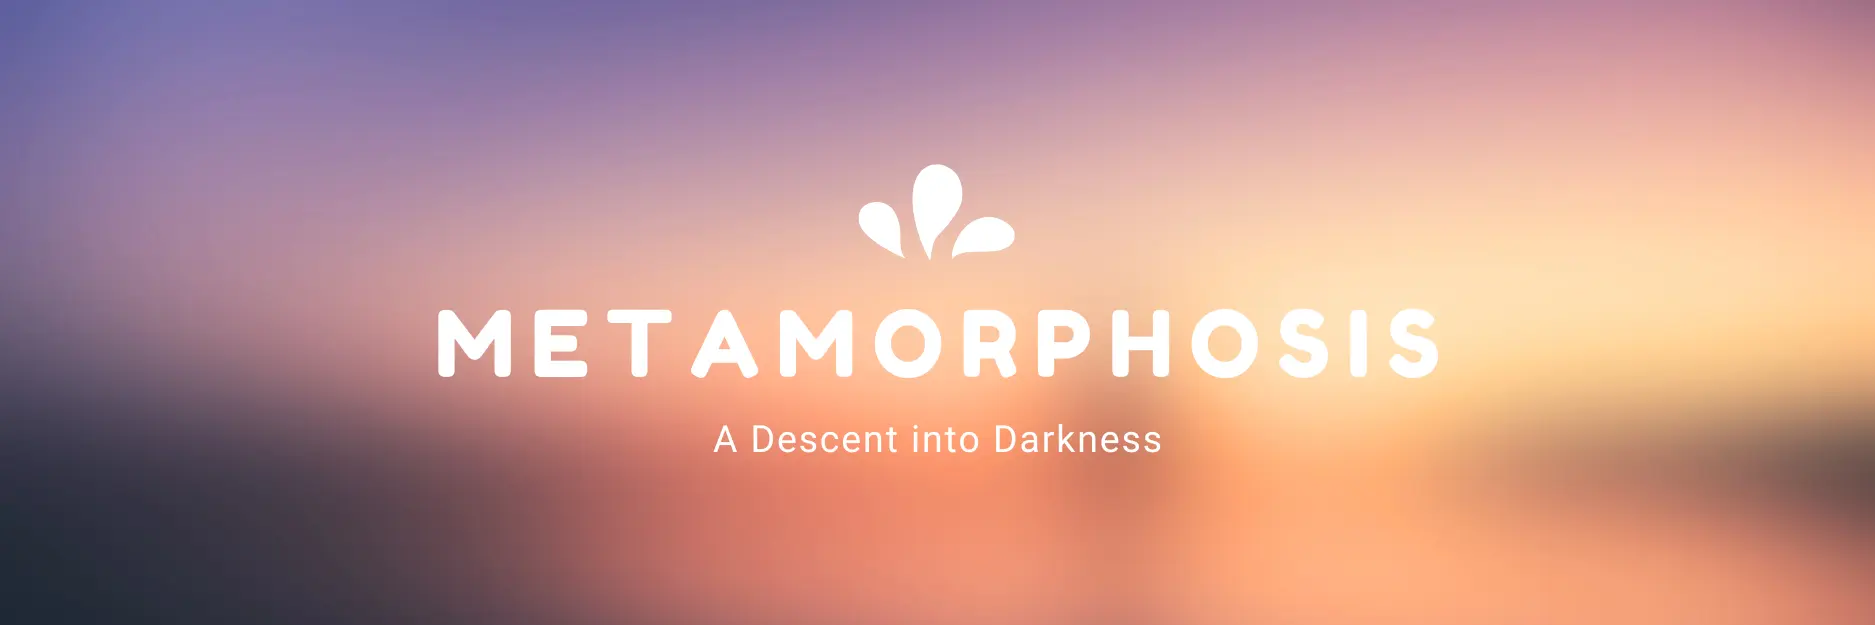 Metamorphosis: A Descent into Darkness main image